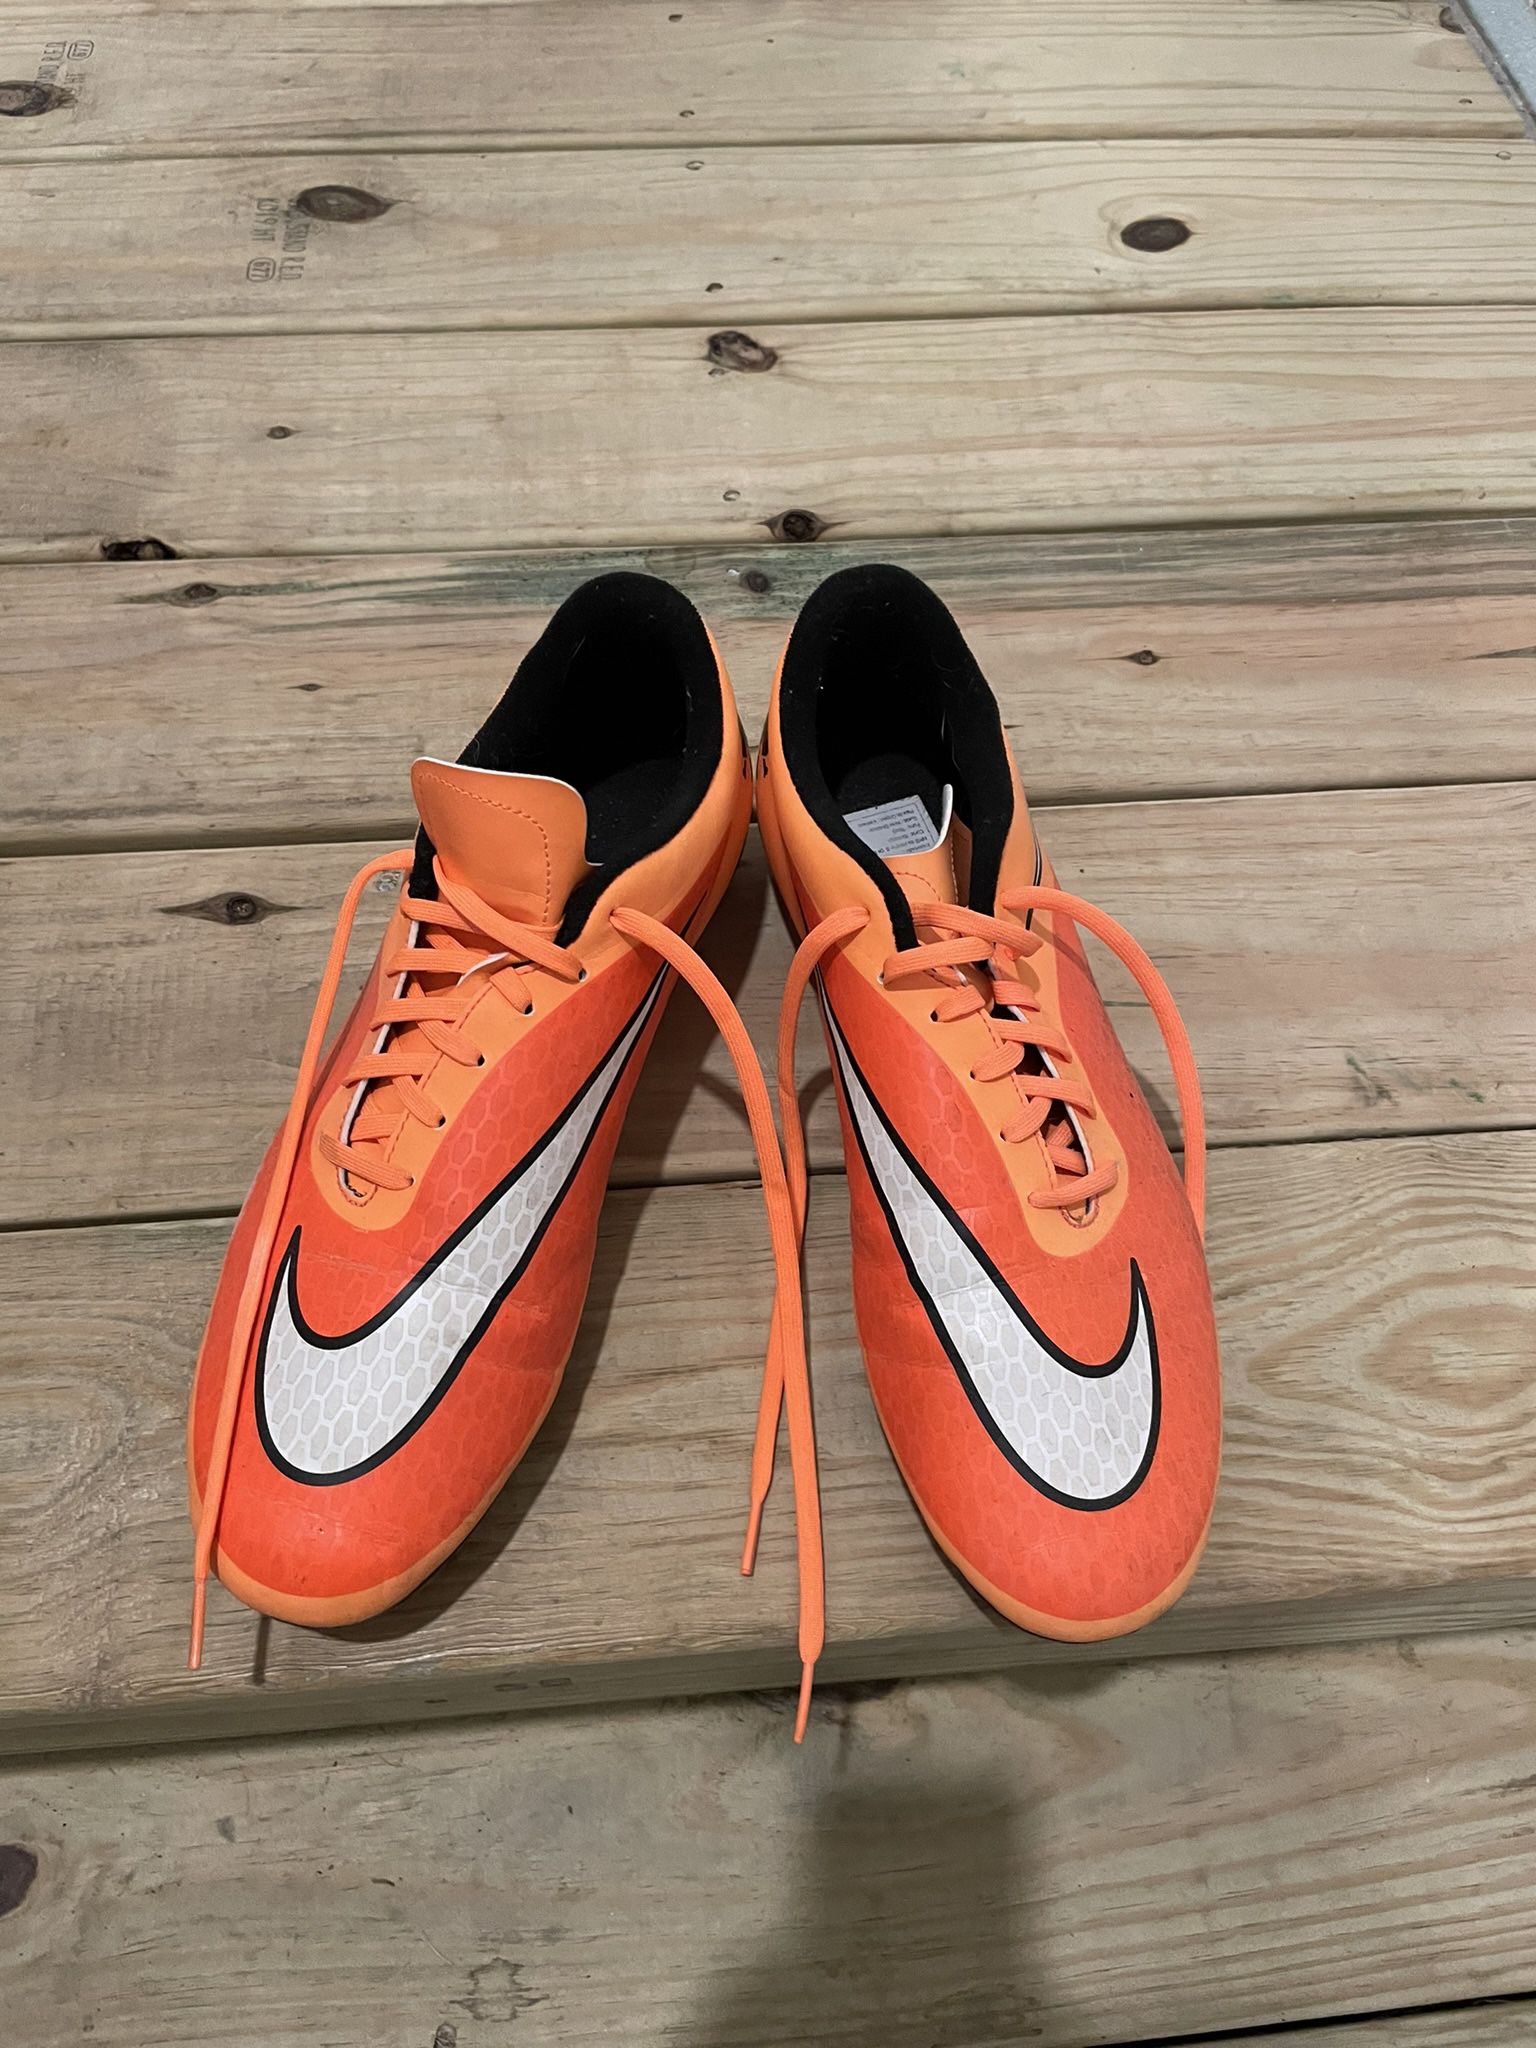 Nike Soccer Shoes 